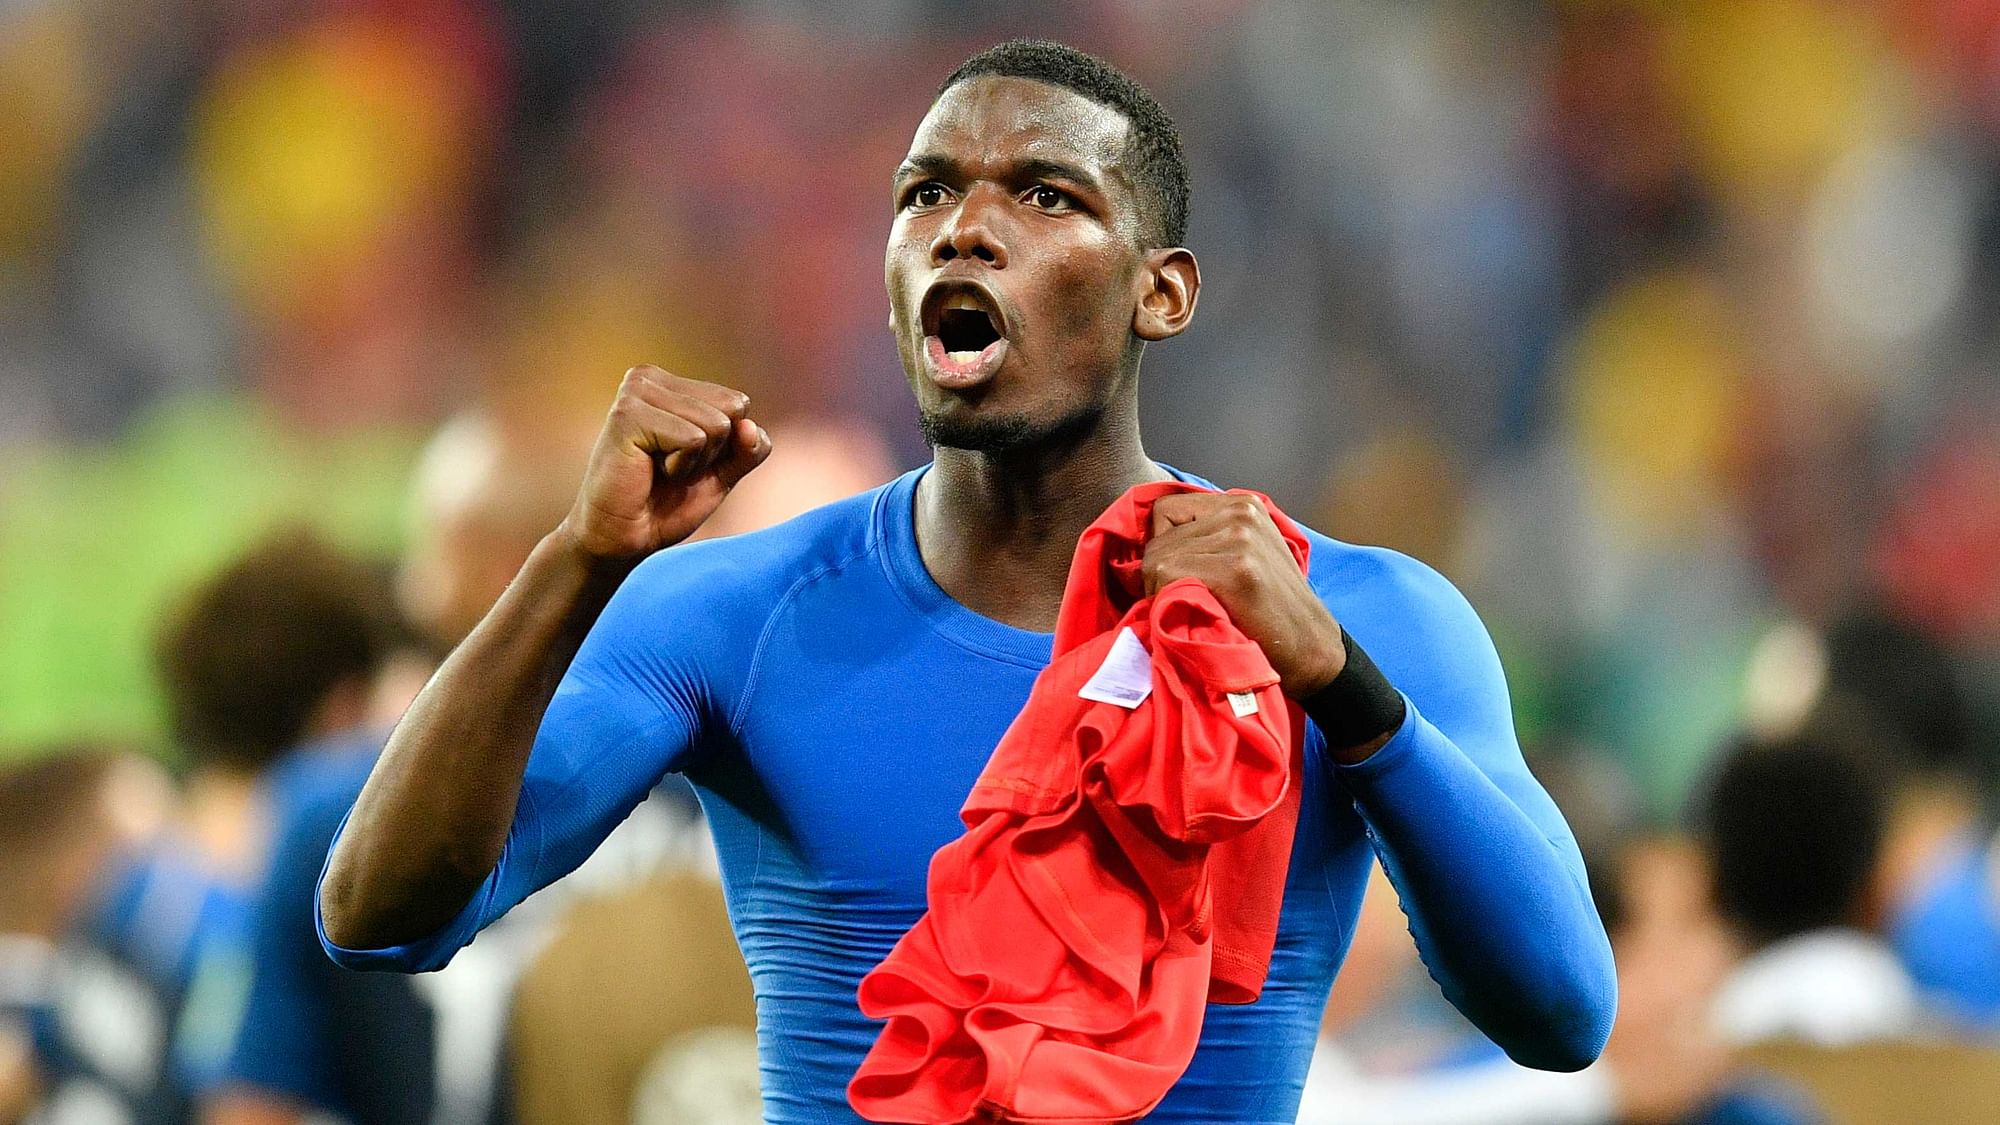 France’s Paul Pogba celebrates after his team advanced to the final after the semifinal match between France and Belgium at the 2018 soccer World Cup in the St. Petersburg Stadium in St. Petersburg, Russia, Tuesday, July 10, 2018.